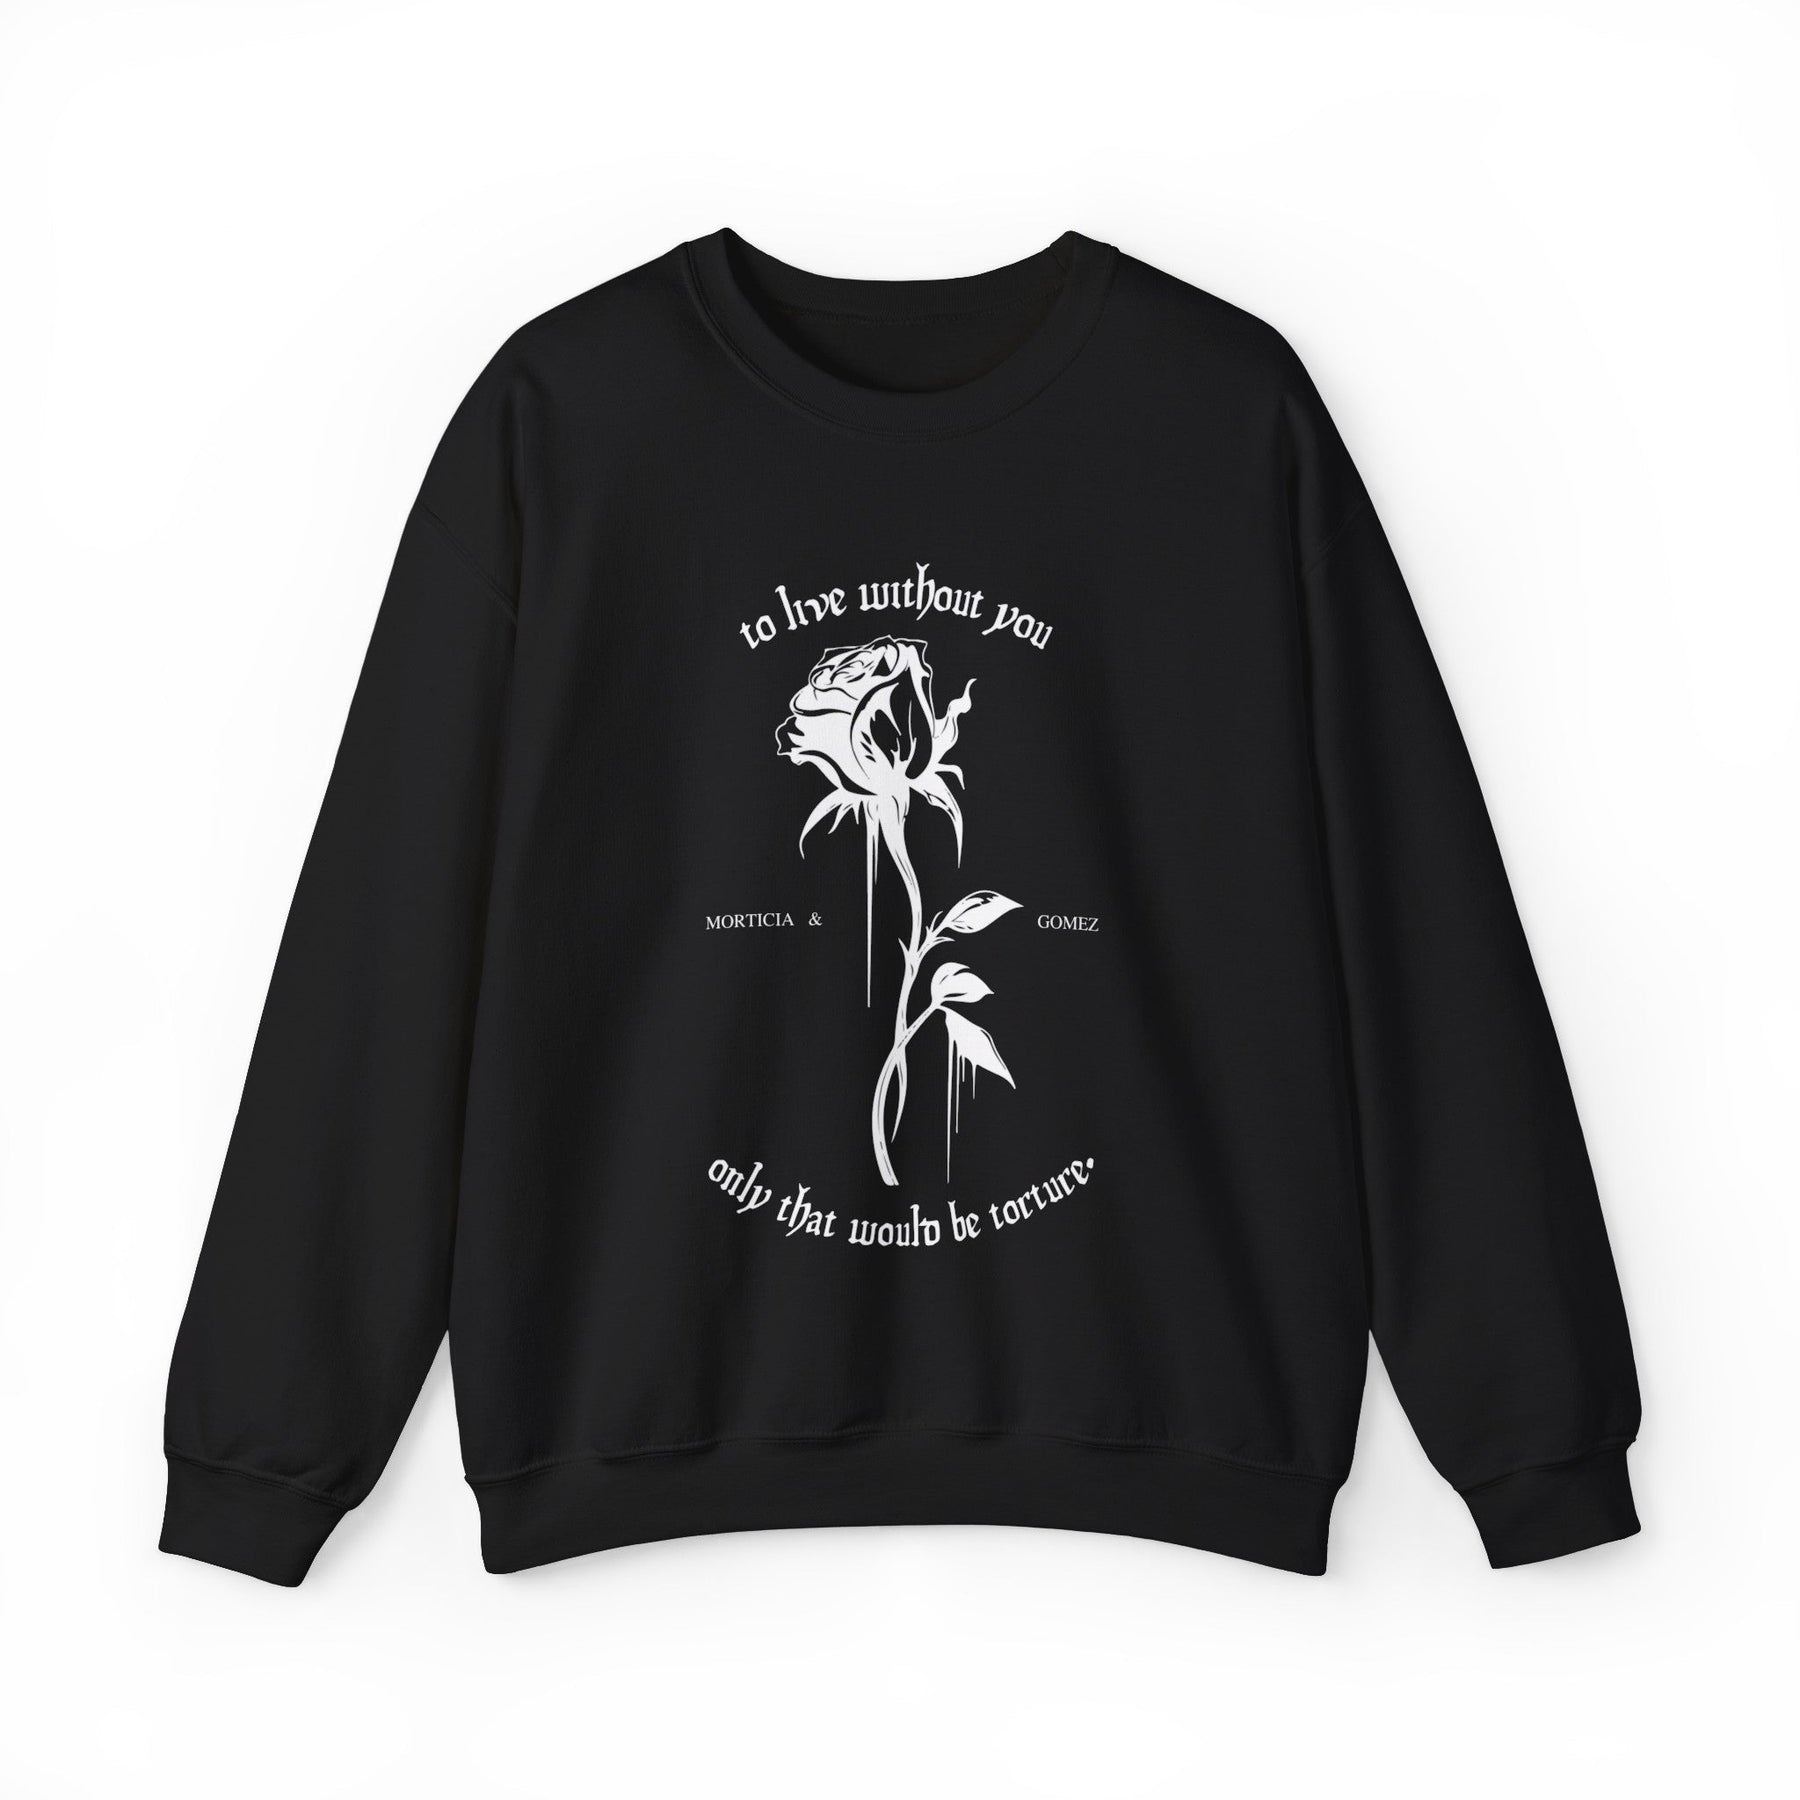 Morticia & Gomez 'Torture Without You' Gothic Rose Sweatshirt - Goth Cloth Co.Sweatshirt33025511089252420592